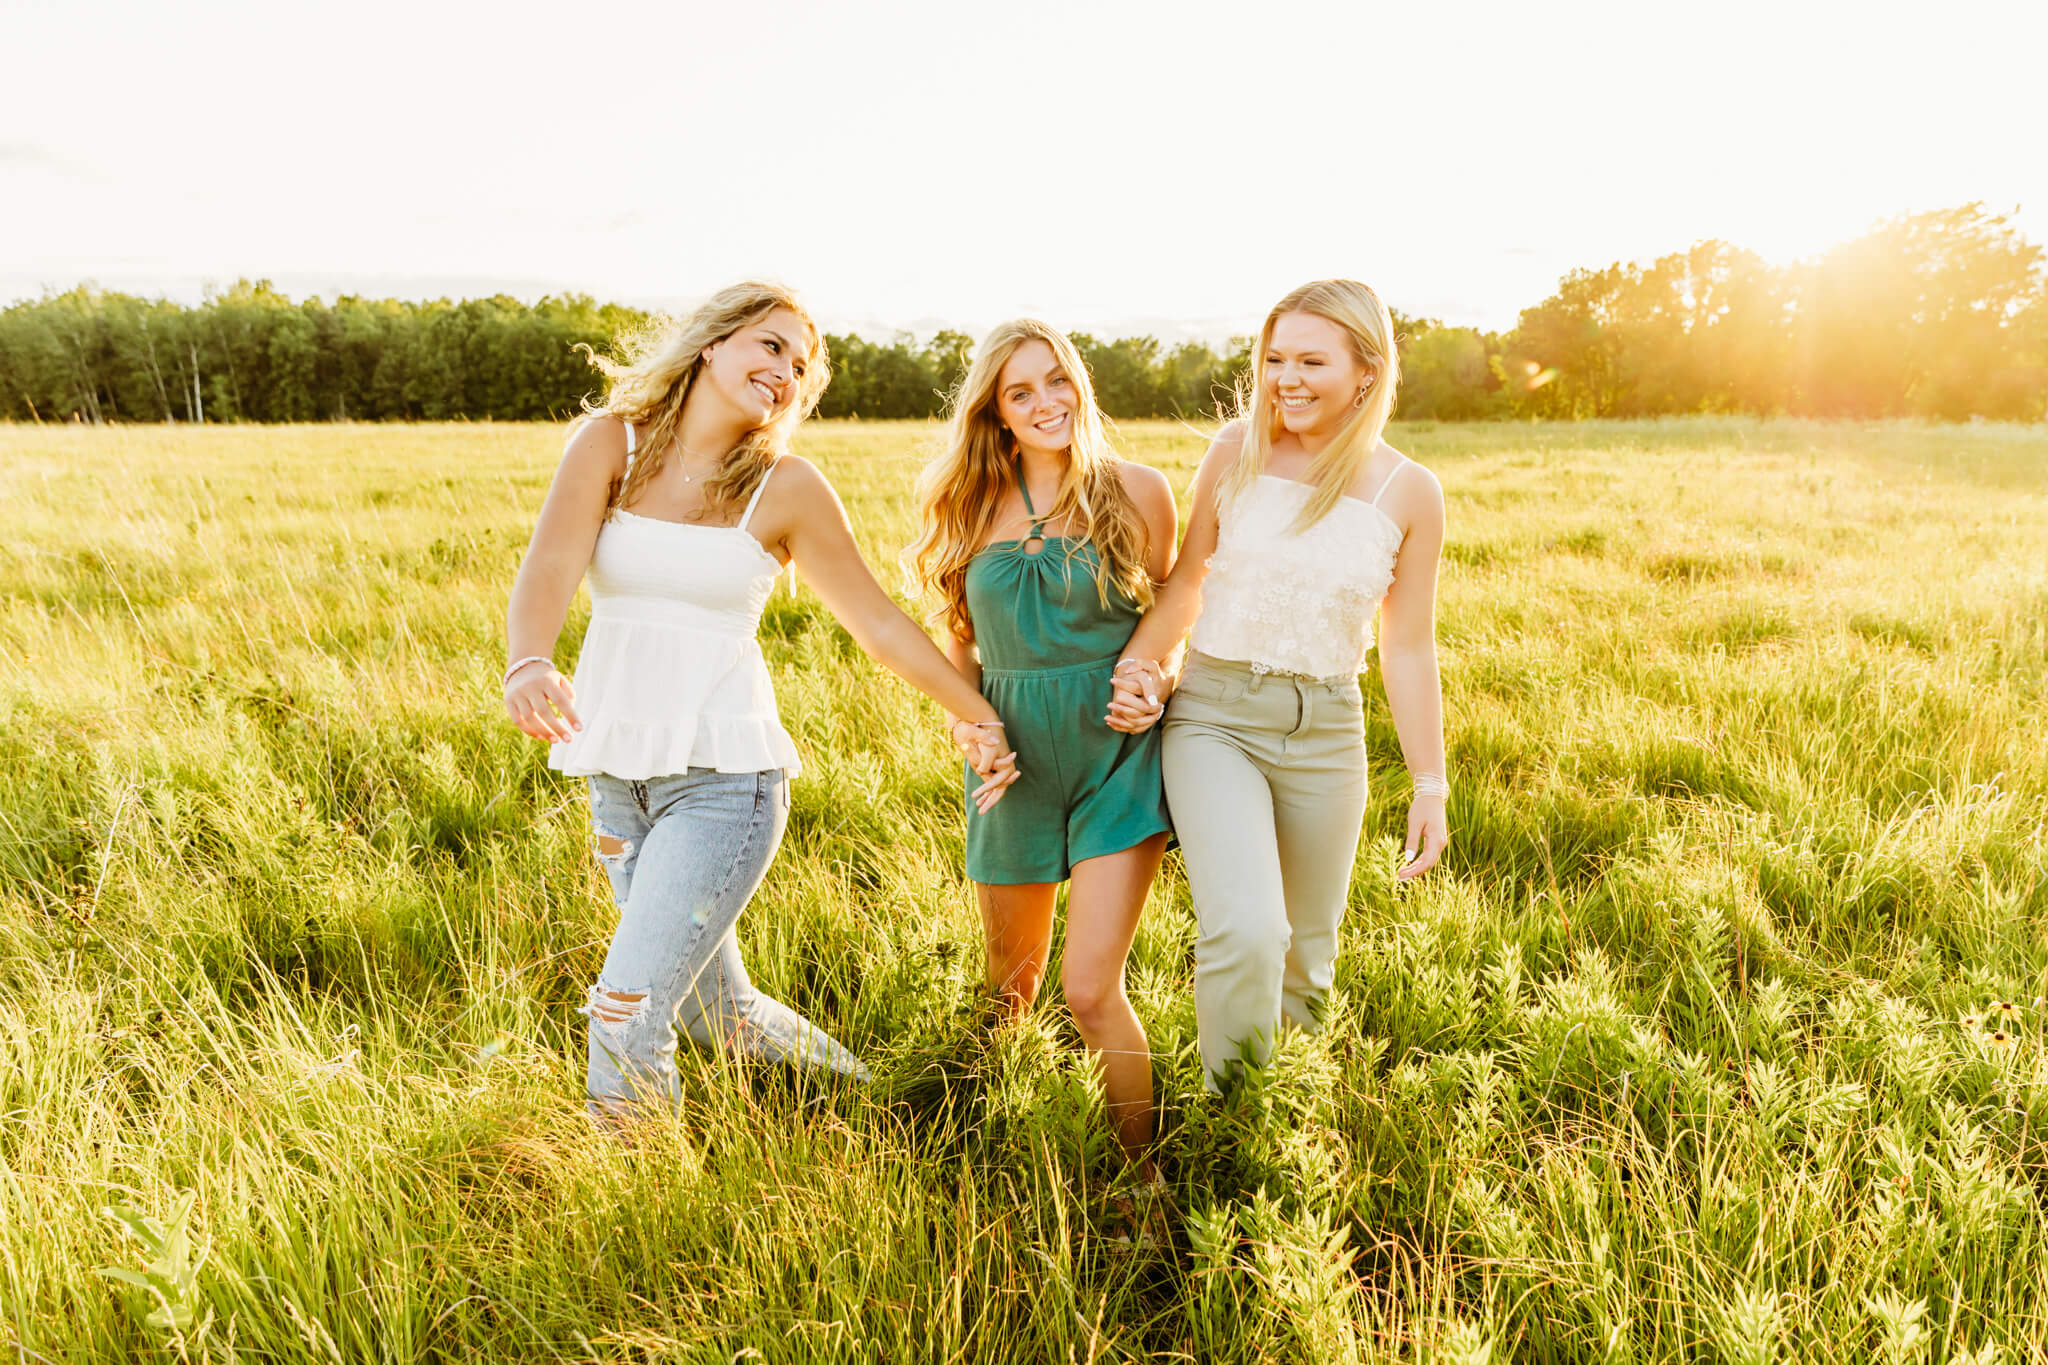 three high school senior girls holding hands while bumping hips in a grassy field near Oshkosh at sunset